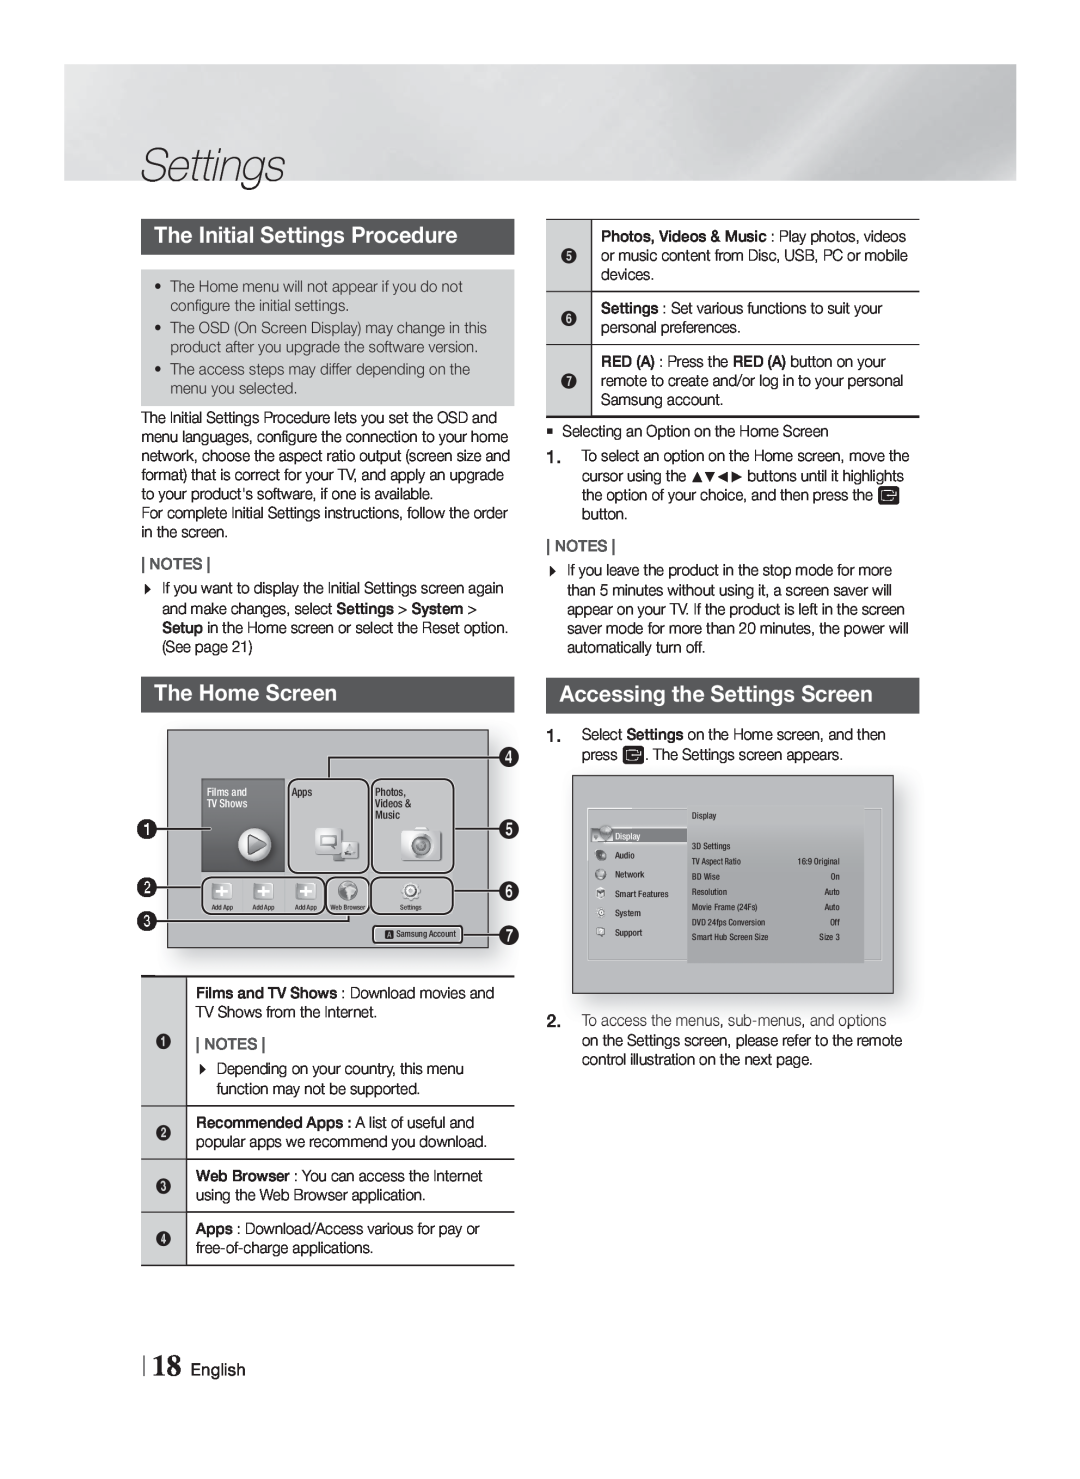 Samsung HT-F5200/EN manual The Initial Settings Procedure, The Home Screen, English, Accessing the Settings Screen 